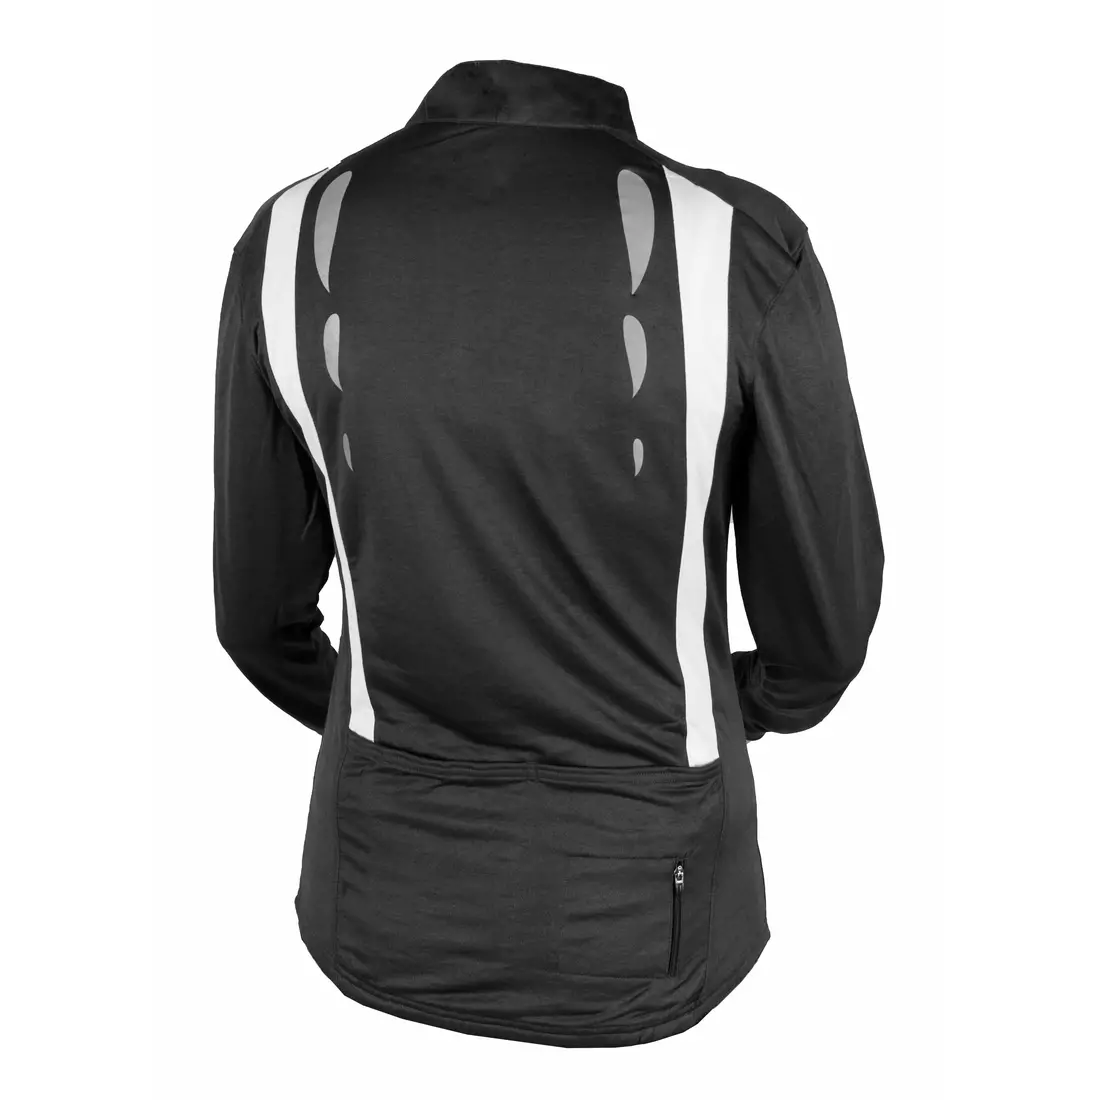 CRIVIT 1001 - women's cycling jersey - black and white